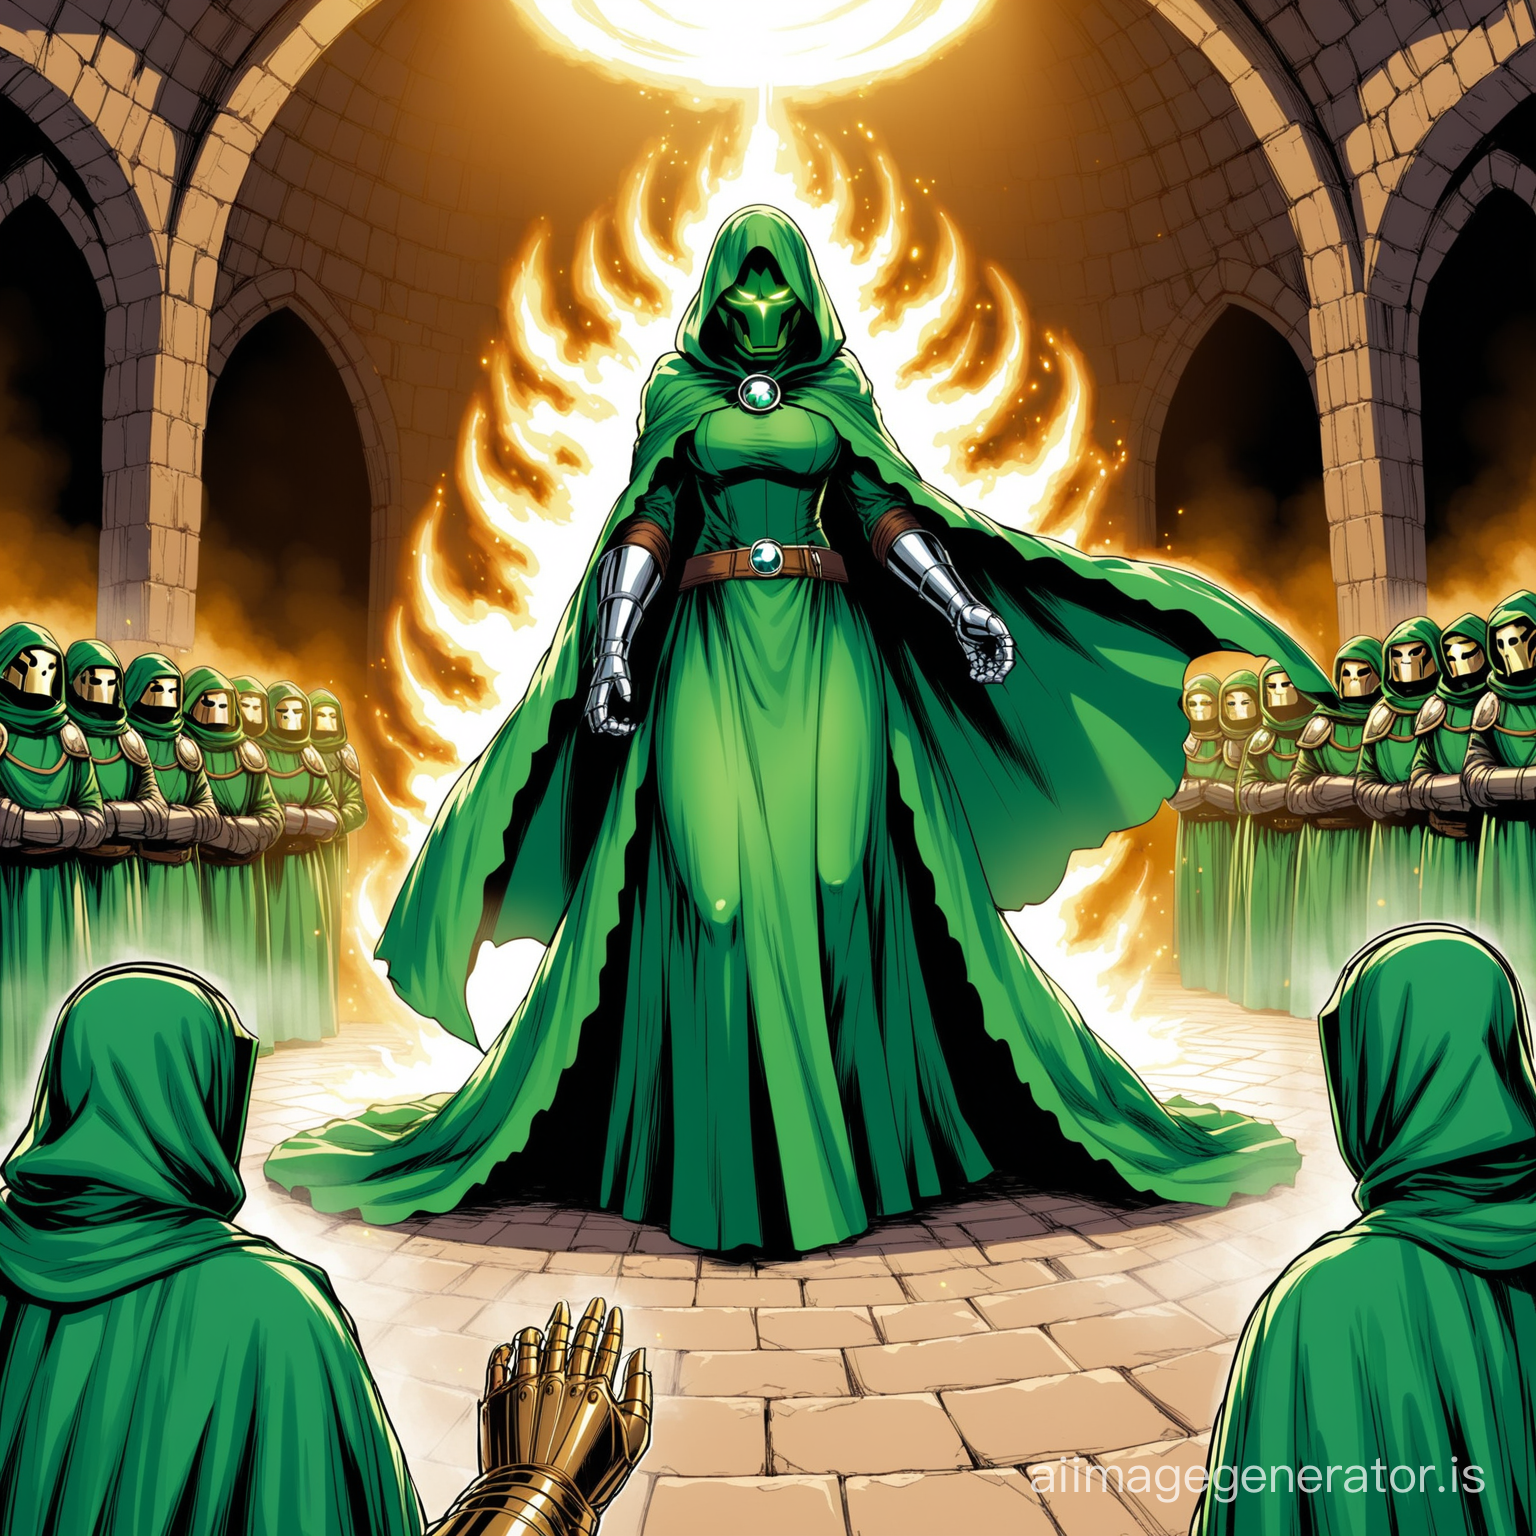 Doctor Doom hypnotizing Sue Storm in a floor-length Medieval dress with heavy cloak and wimple veil